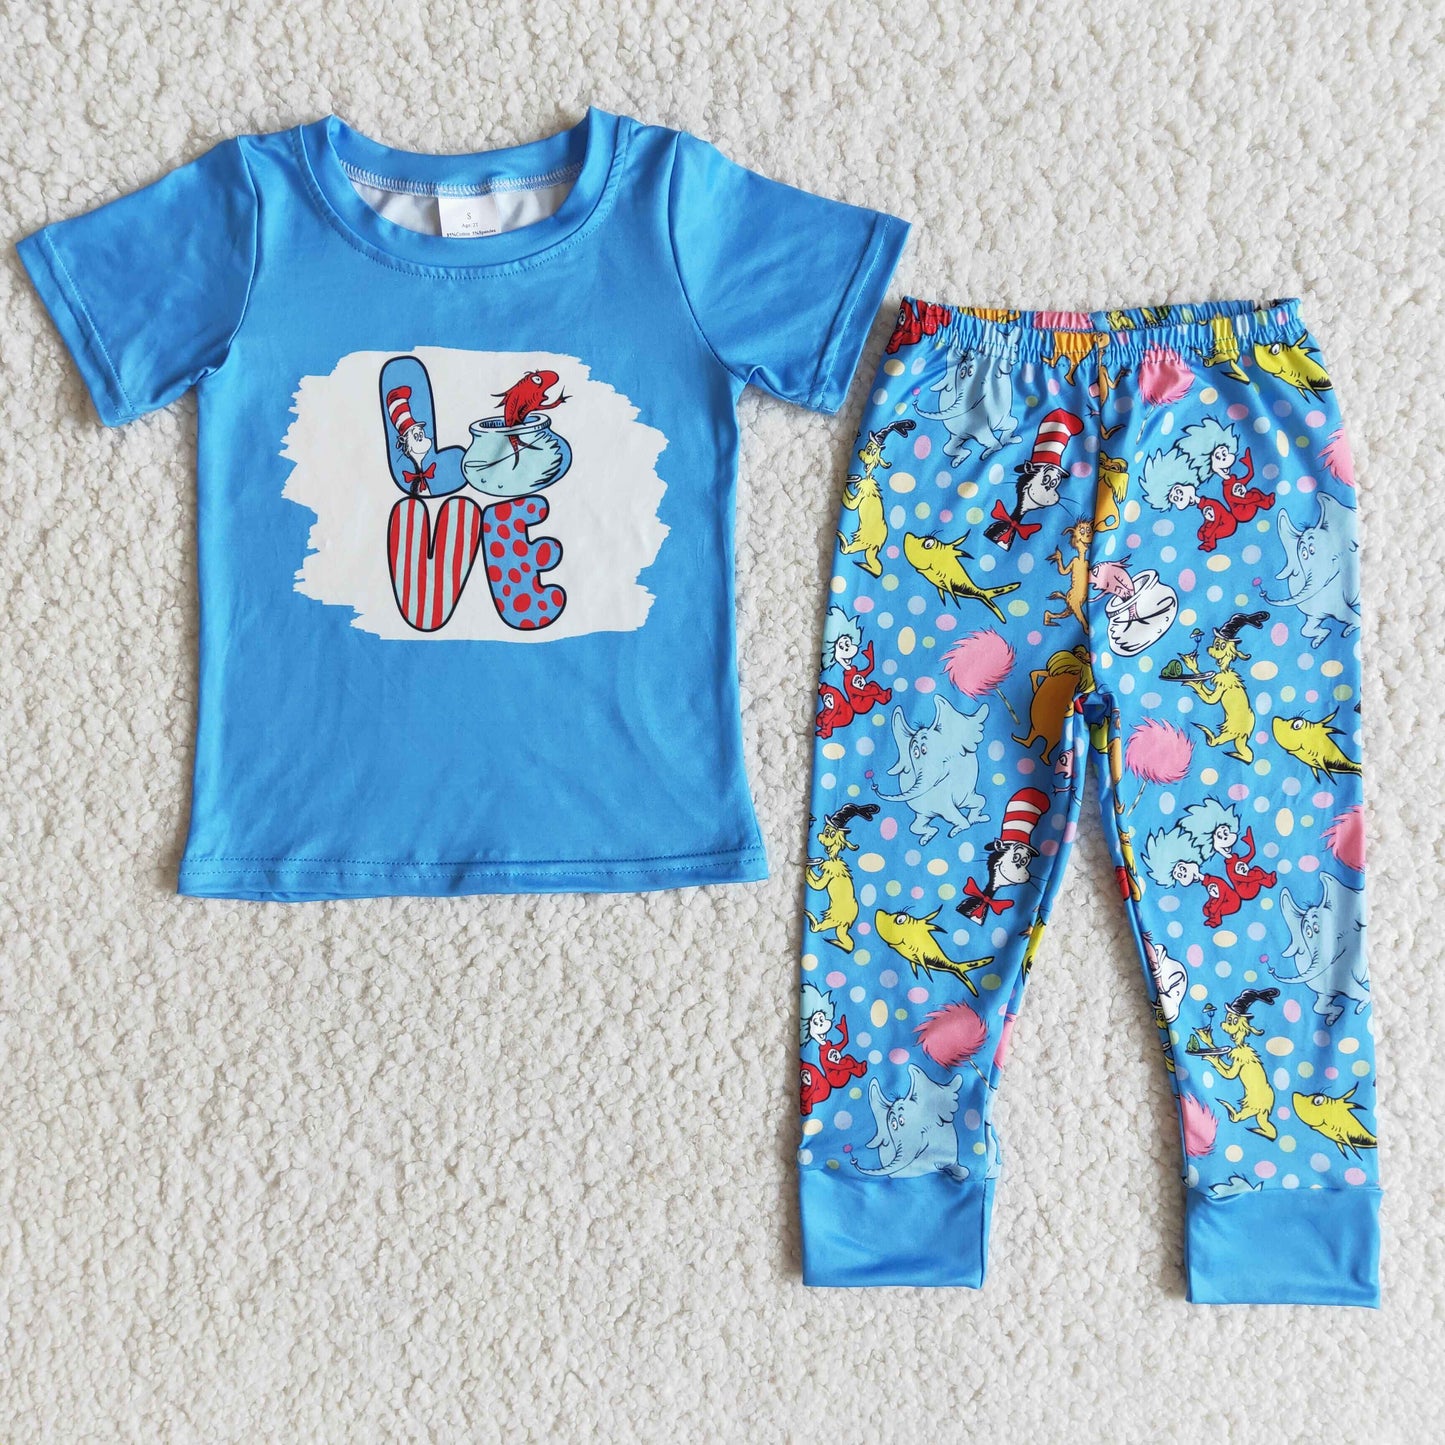 E6-28 LOVE cat in the hat baby boy outfits